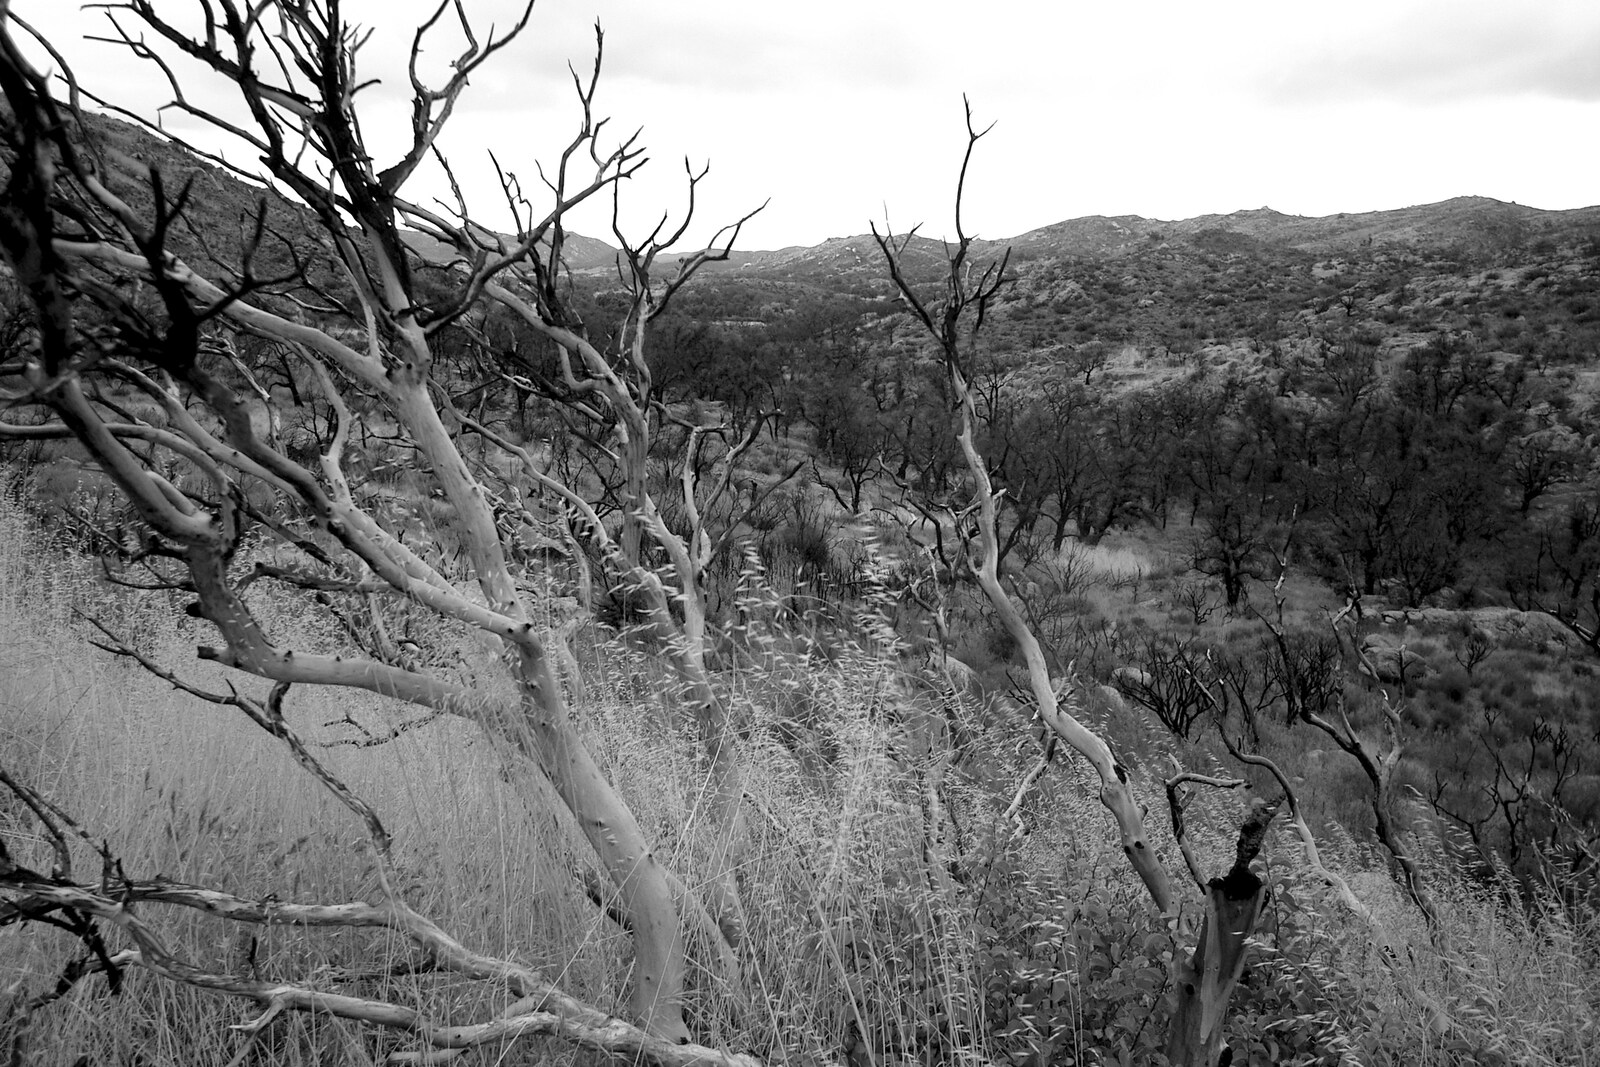 More skeletal trees from Route 78: A Drive Around the San Diego Mountains, California, US - 9th August 2005